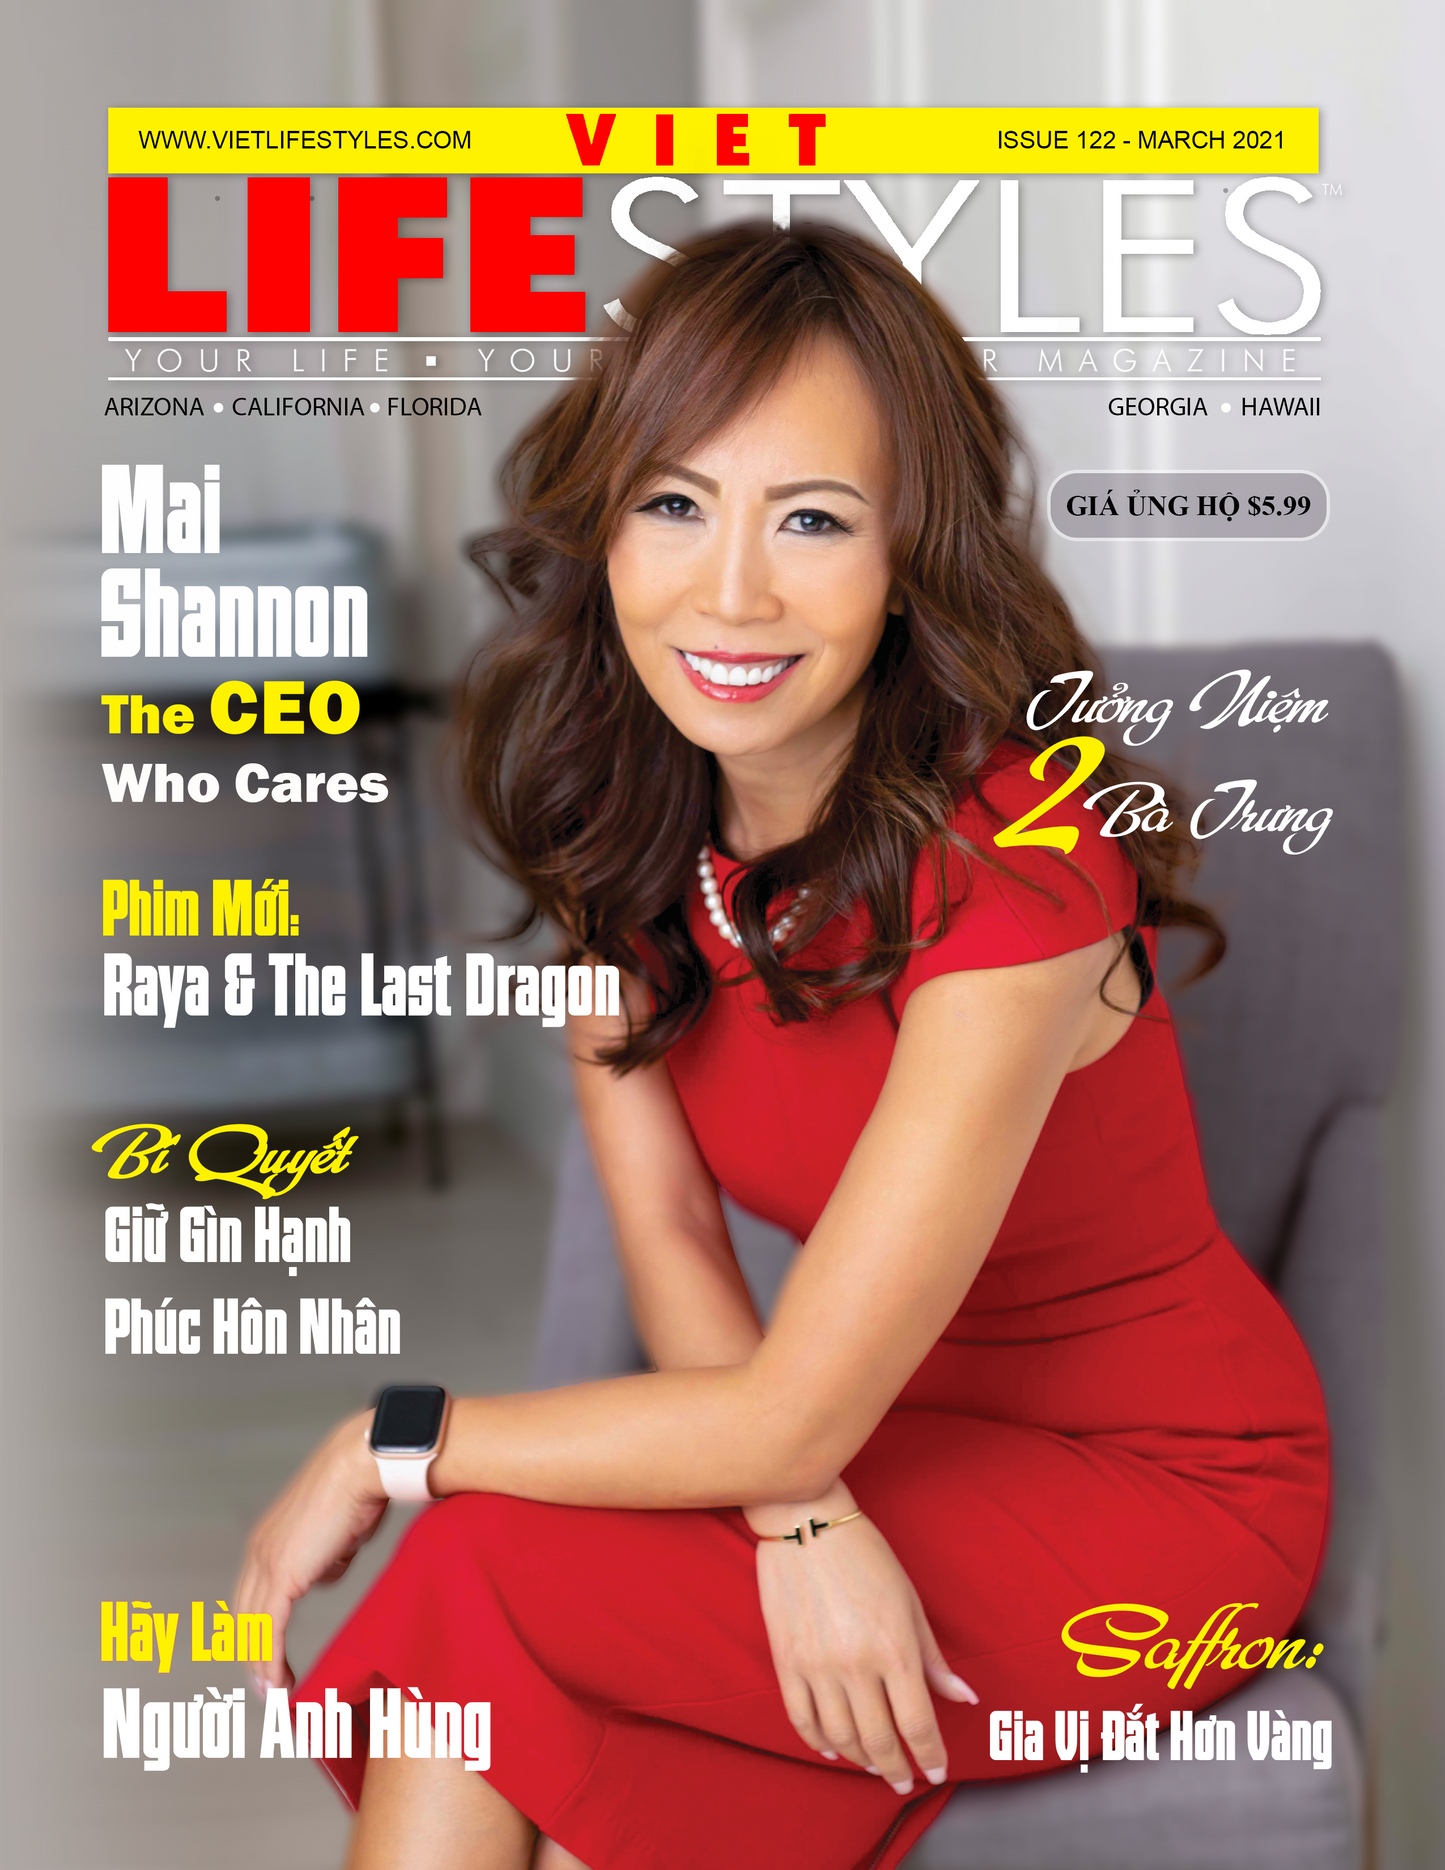 Vietlifestyles Issue 122 Featuring Mai Shannon